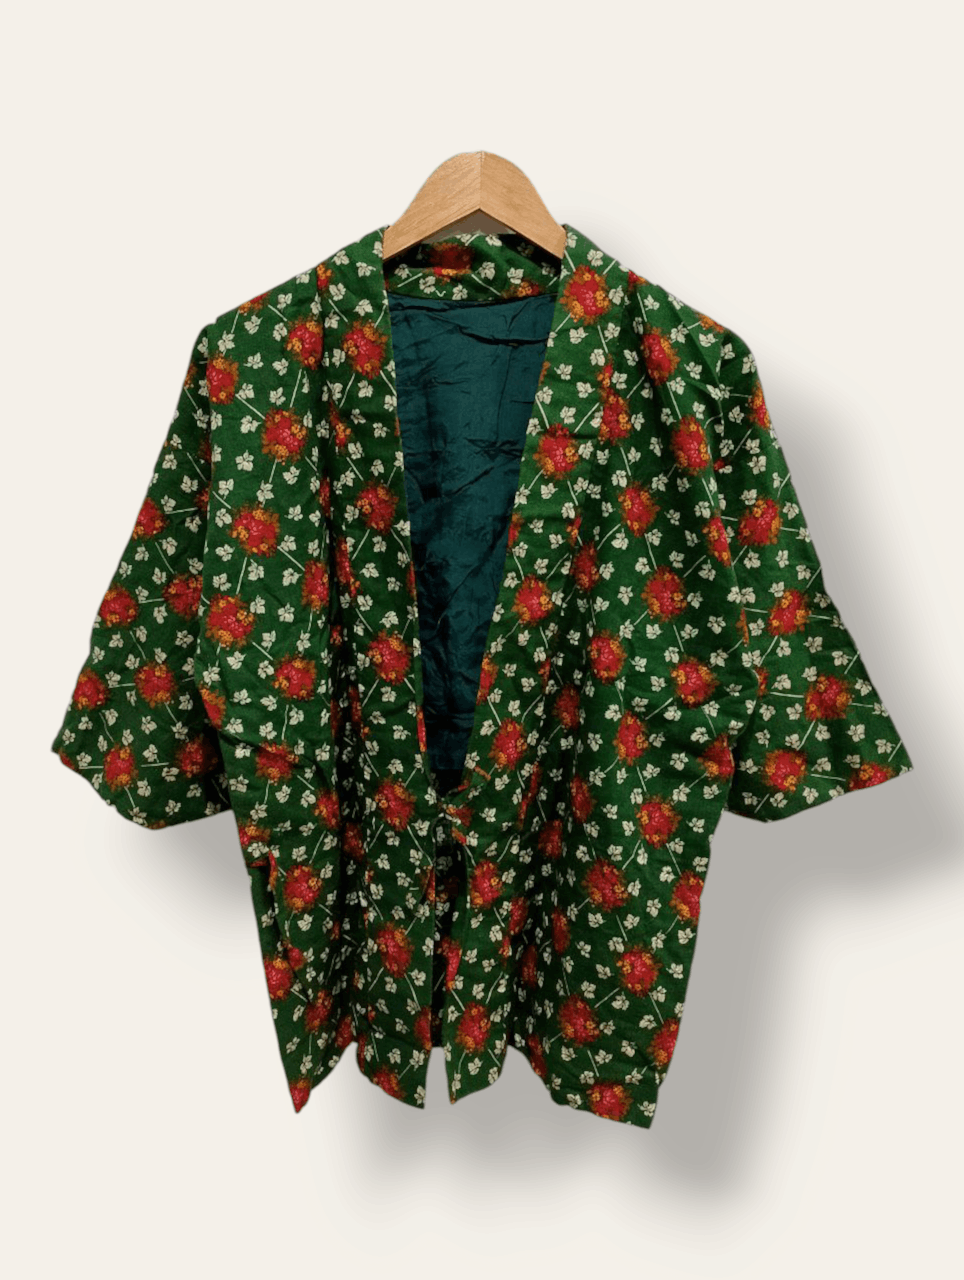 Archival Clothing - Japanese Floral Green Abstract Kimono - 1